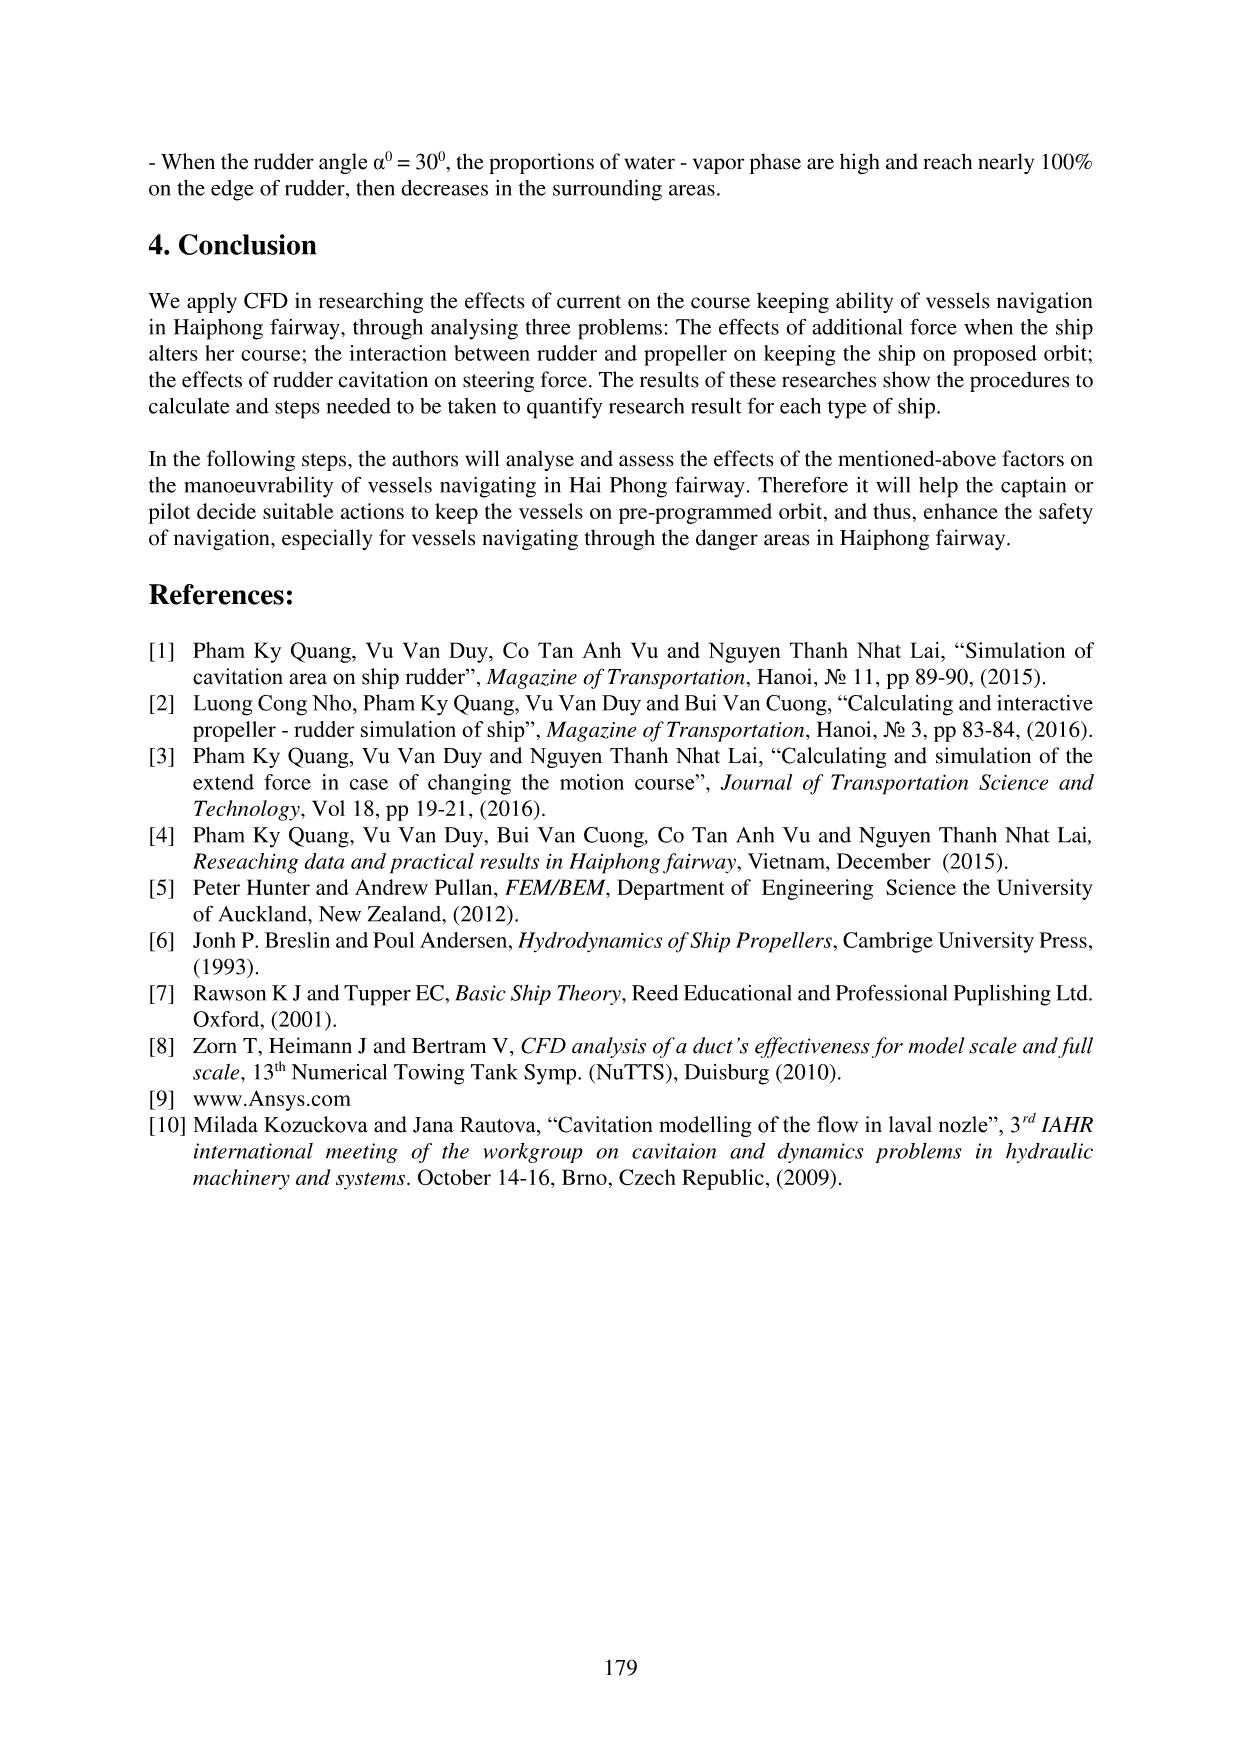 Calculation and simulation of the current effects on maritime safety in Haiphong fairway, Vietnam trang 10